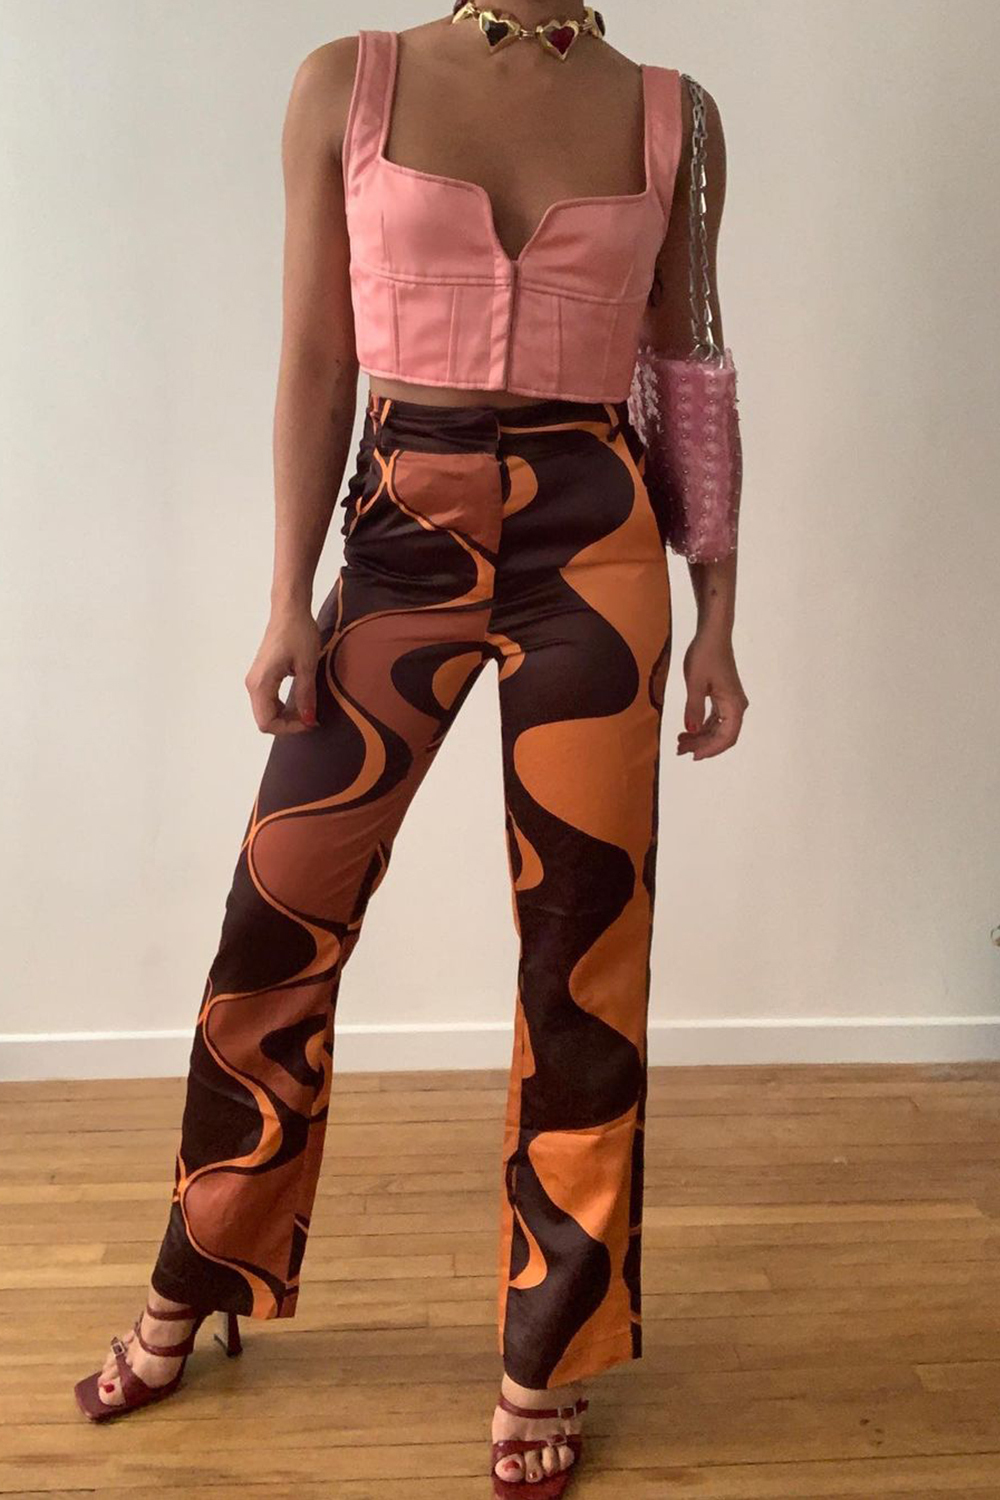 Corset Top Outfits: @maria_bernad wears a pink corset top with wave-print trousers